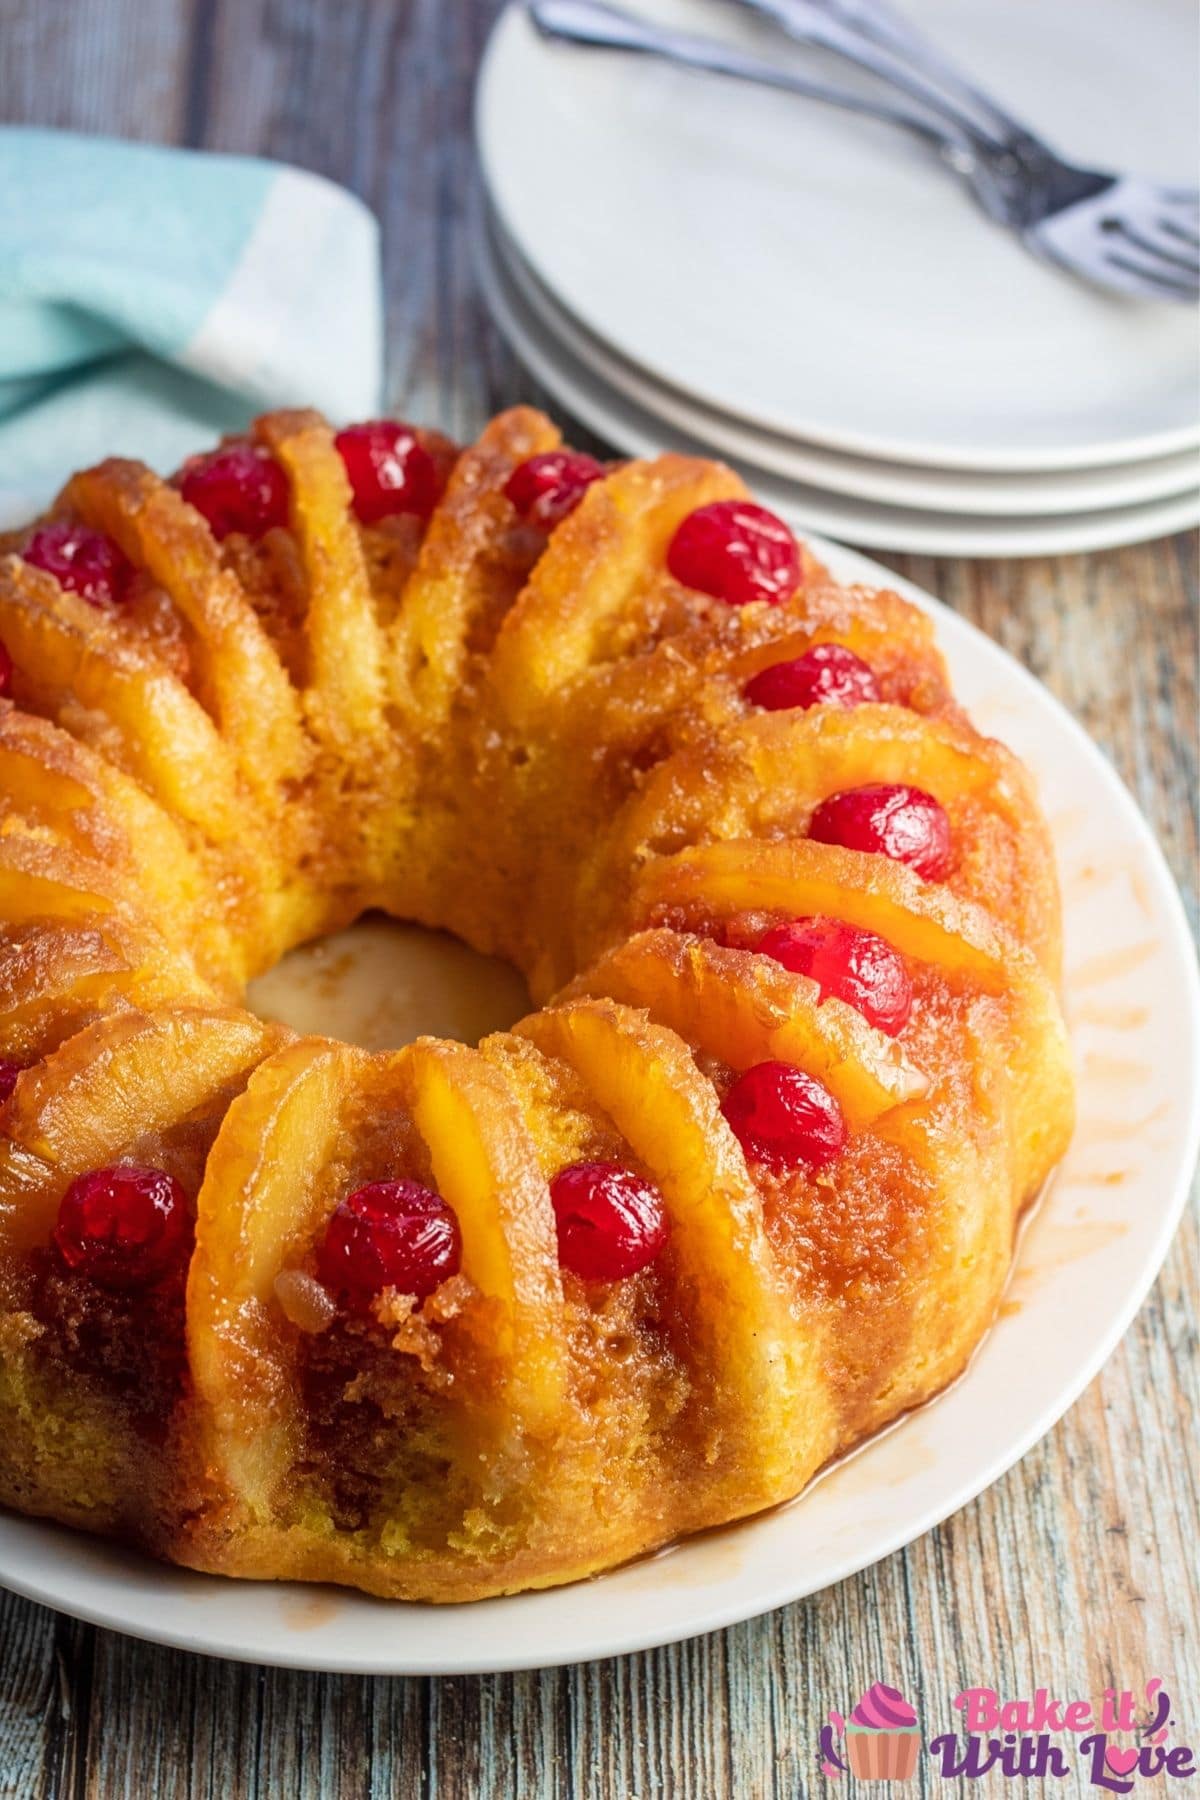 Tall image of the pineapple upside down bundt cake before slicing and serving.